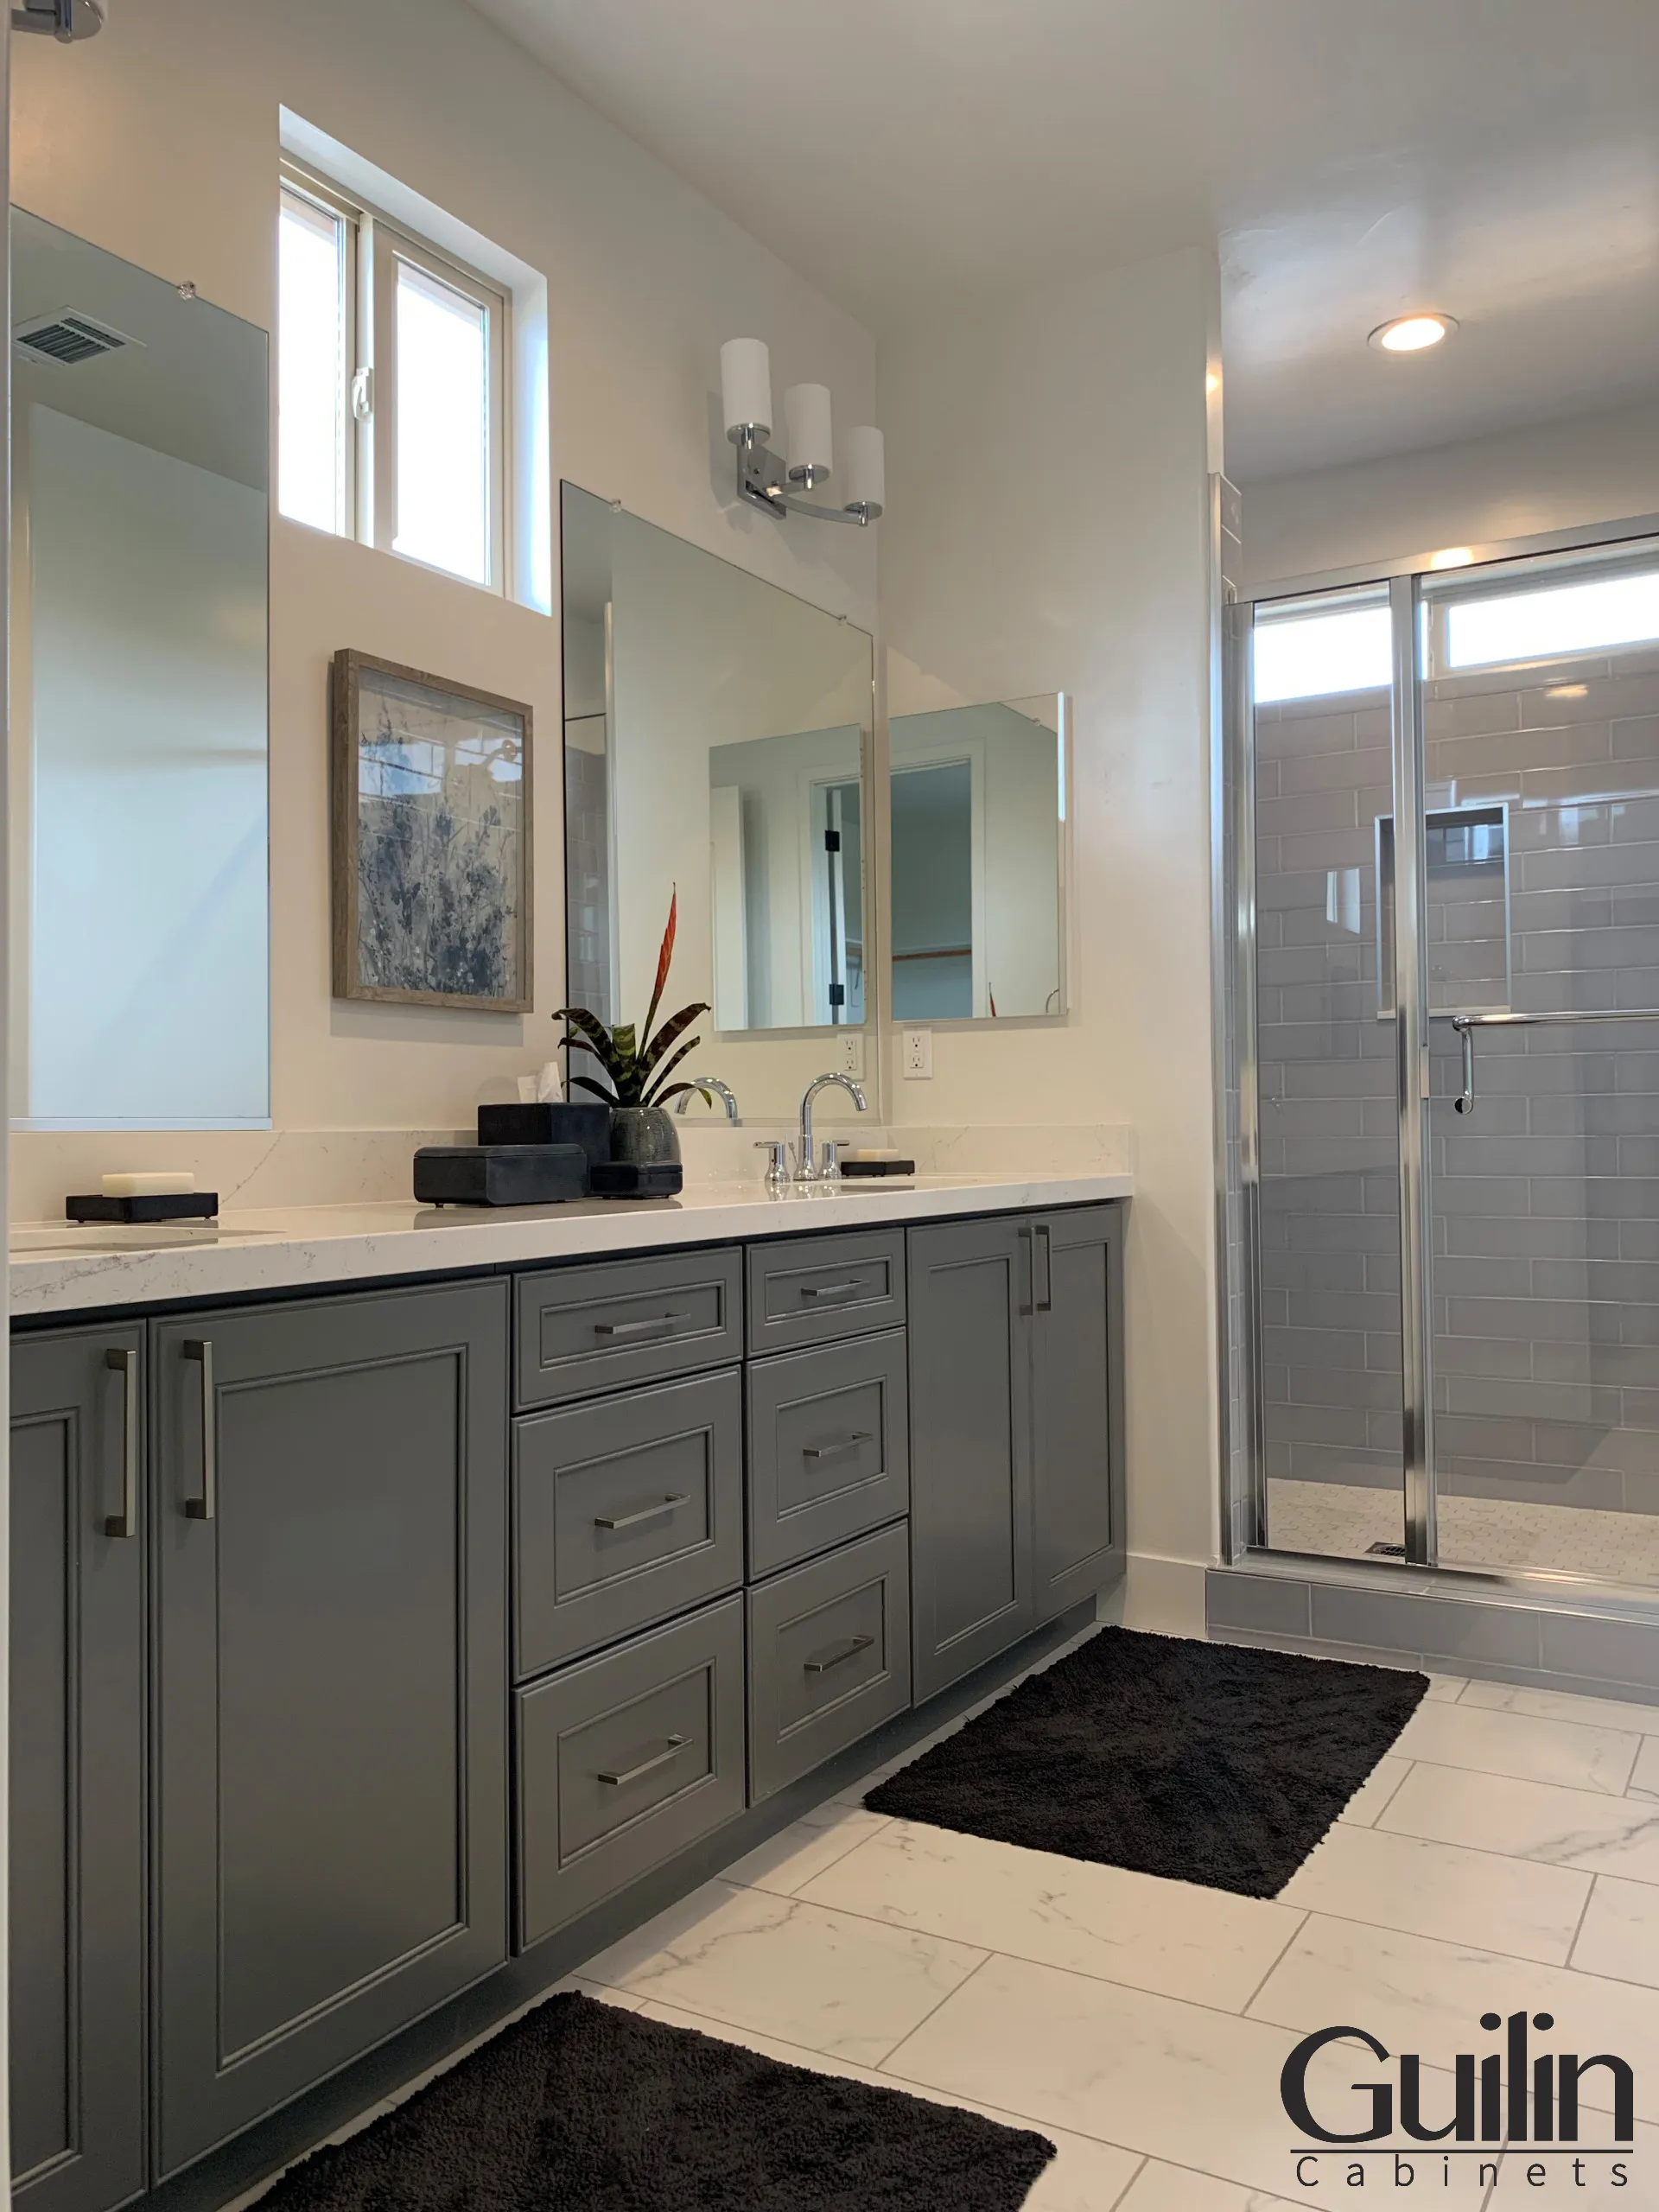 the minimum size for a master bathroom is around 50 square feet